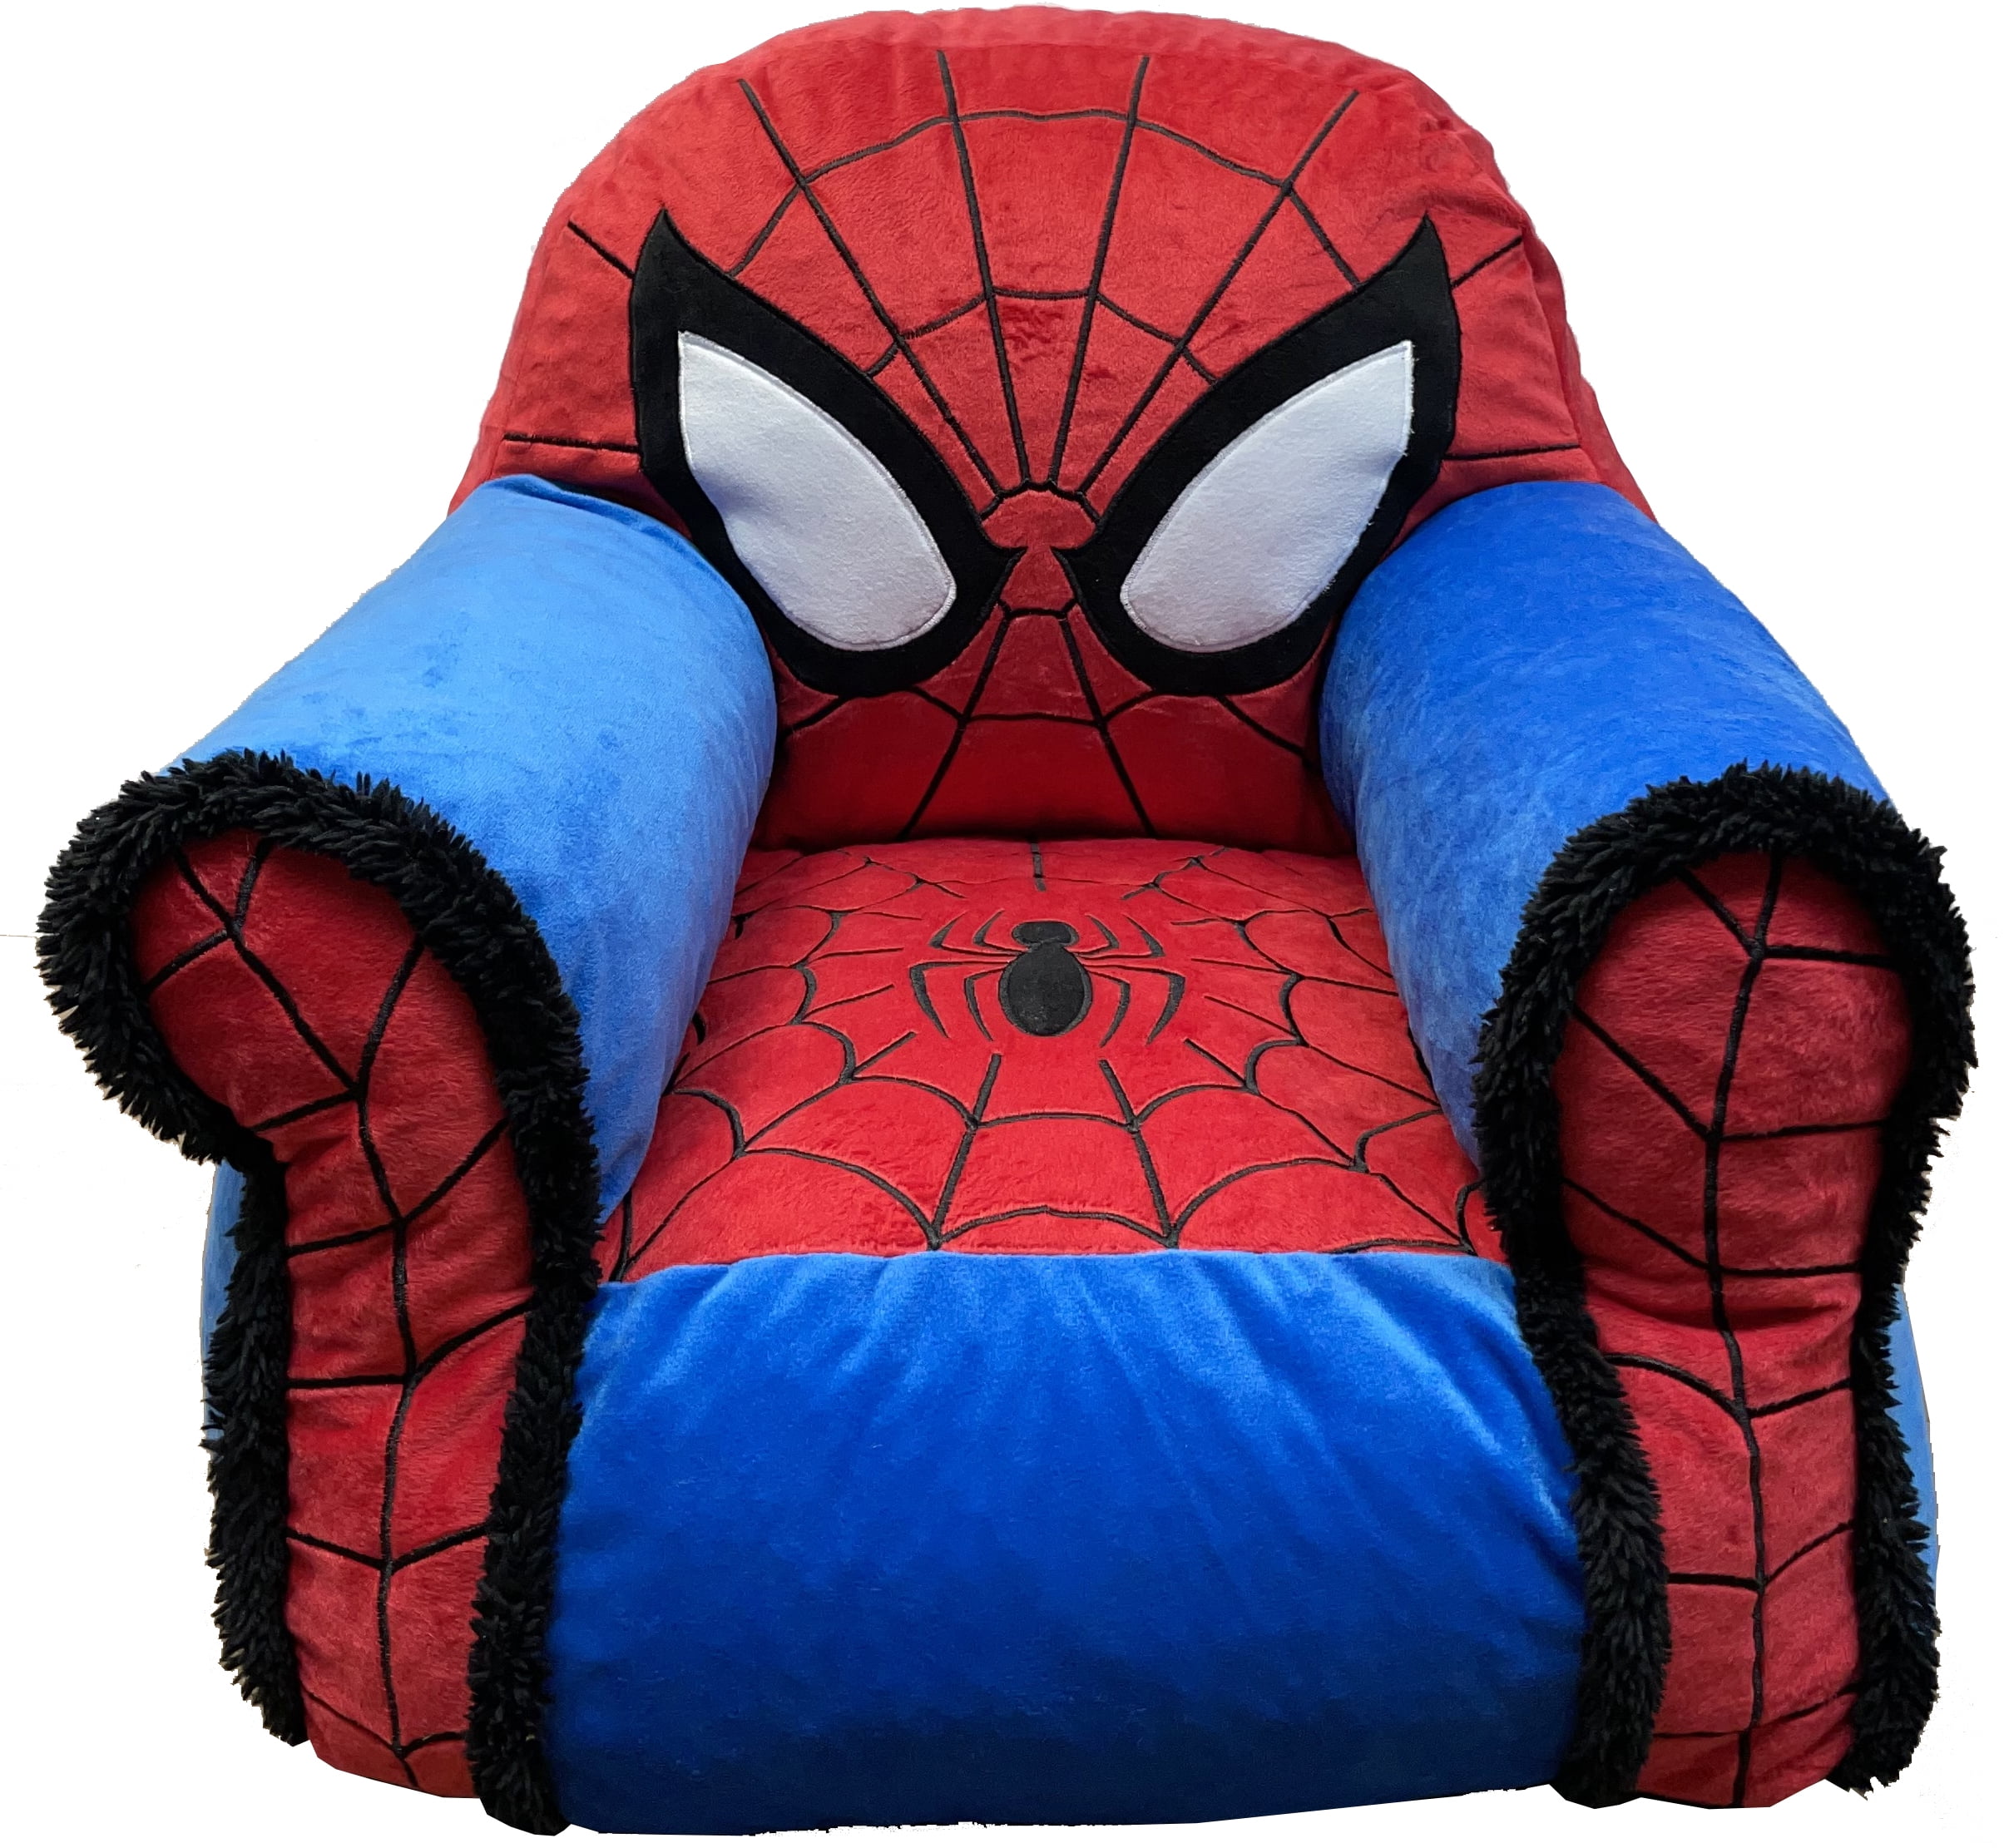 Marvel  ** GREAT GIFT ** Ultimate Spider-Man Inflatable Bean Bag Toss 